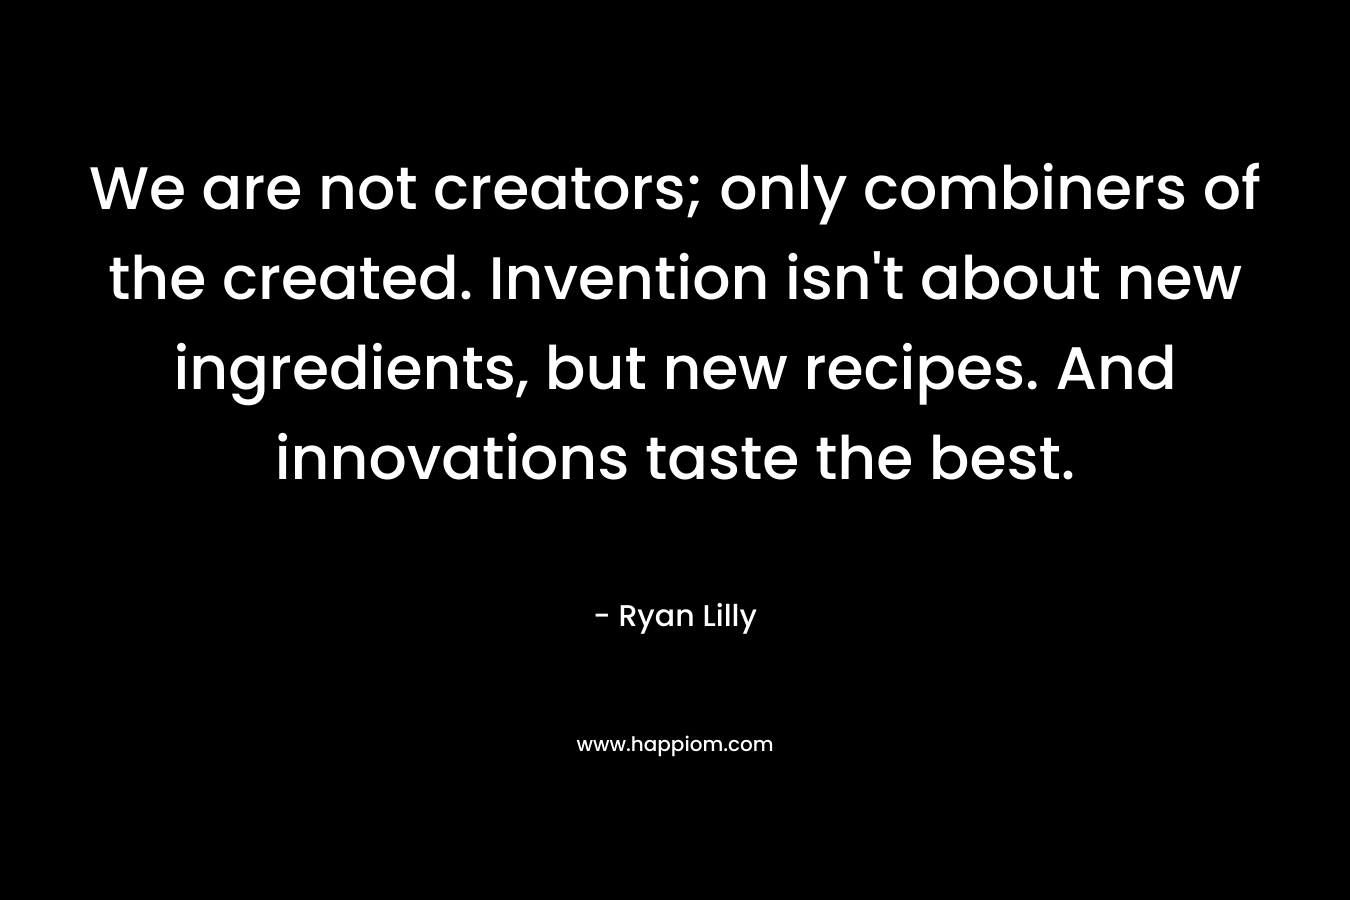 We are not creators; only combiners of the created. Invention isn't about new ingredients, but new recipes. And innovations taste the best.